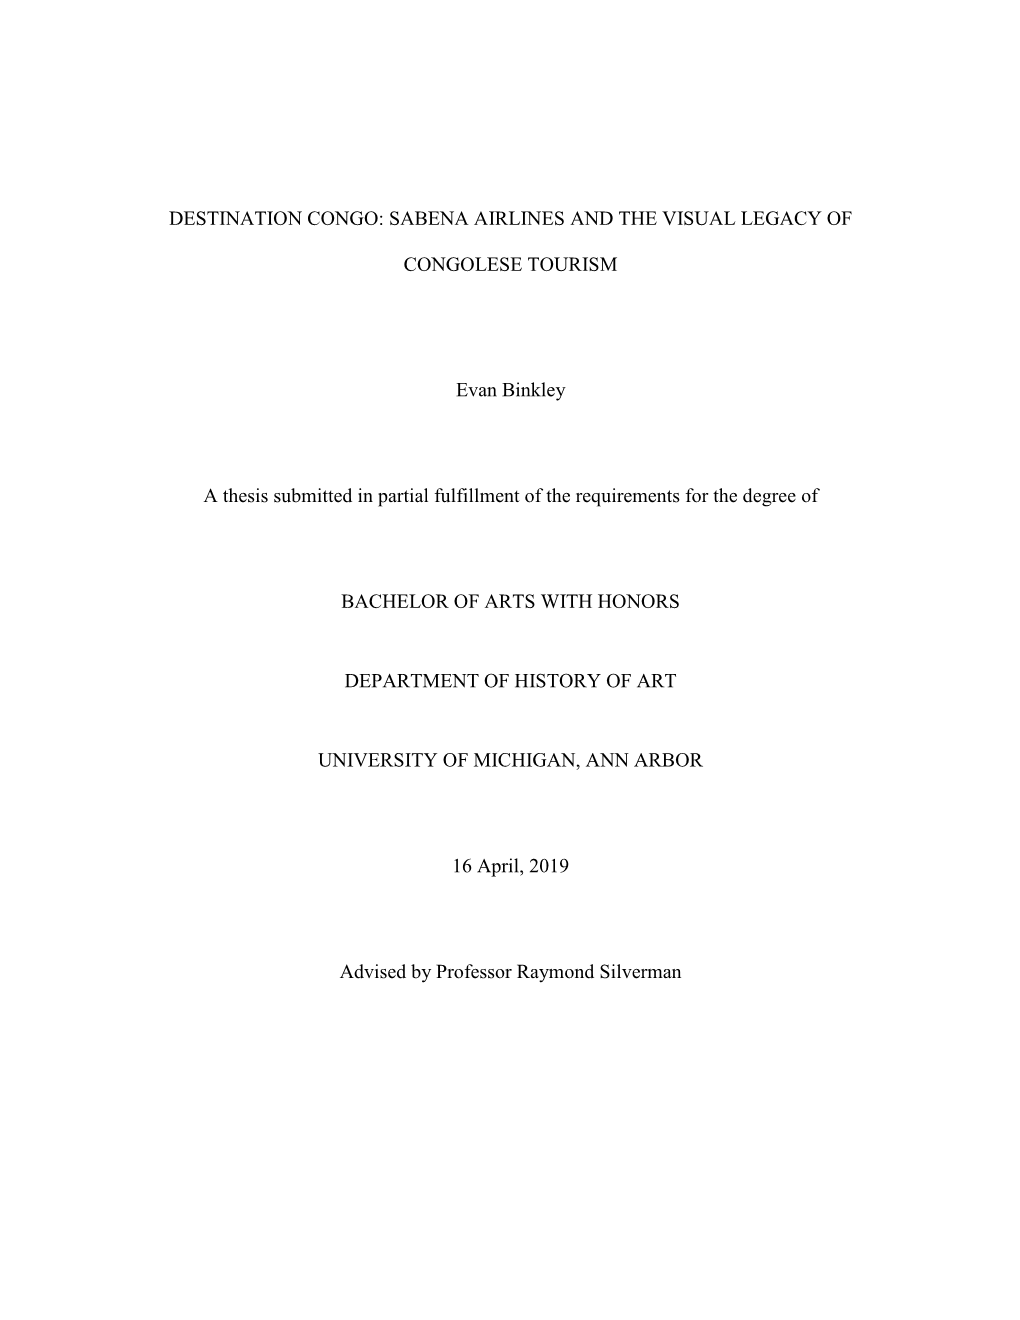 DESTINATION CONGO: SABENA AIRLINES and the VISUAL LEGACY of CONGOLESE TOURISM Evan Binkley a Thesis Submitted in Partial Fulfil